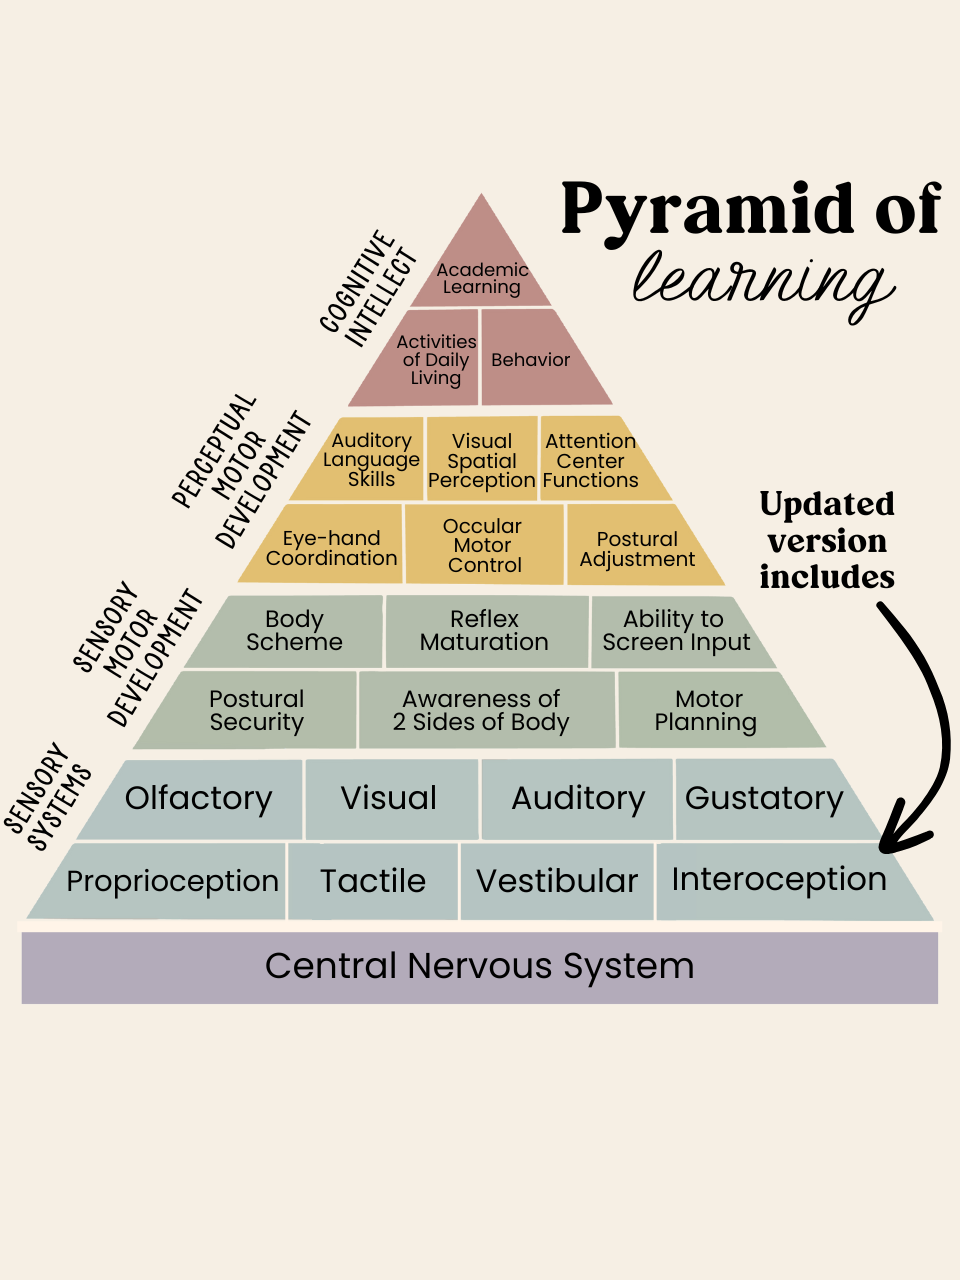 Pyramid of Learning Informational Handout